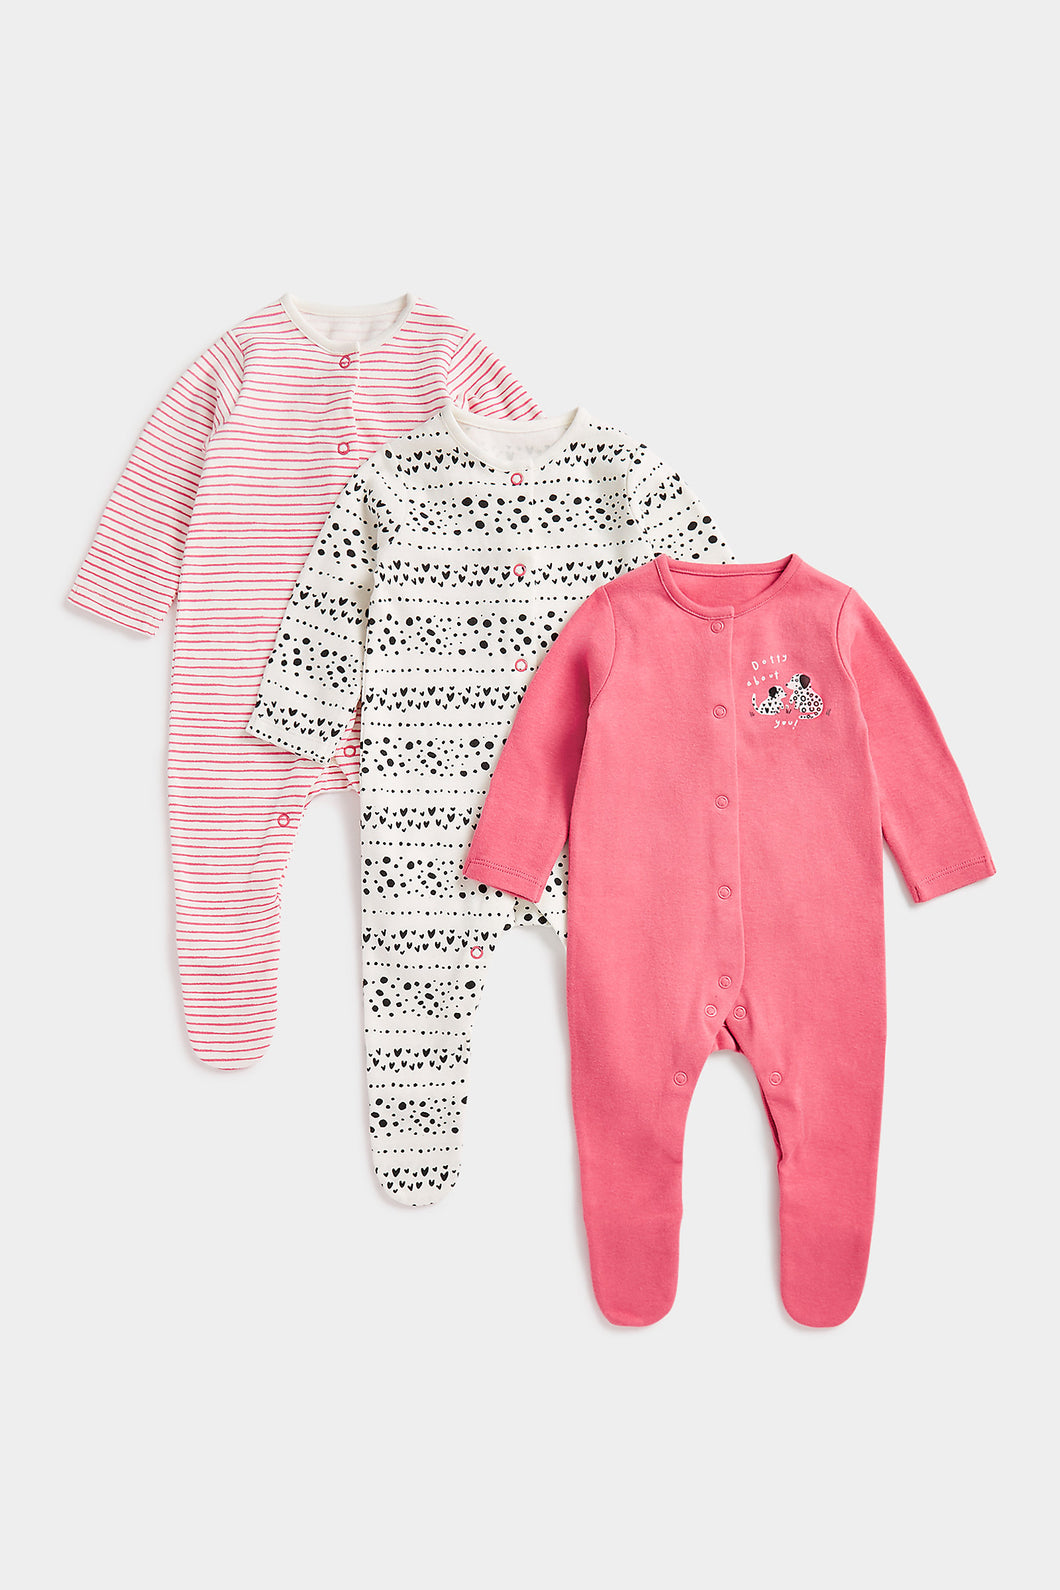 Mothercare Spotty Dog Sleepsuits - 3 Pack